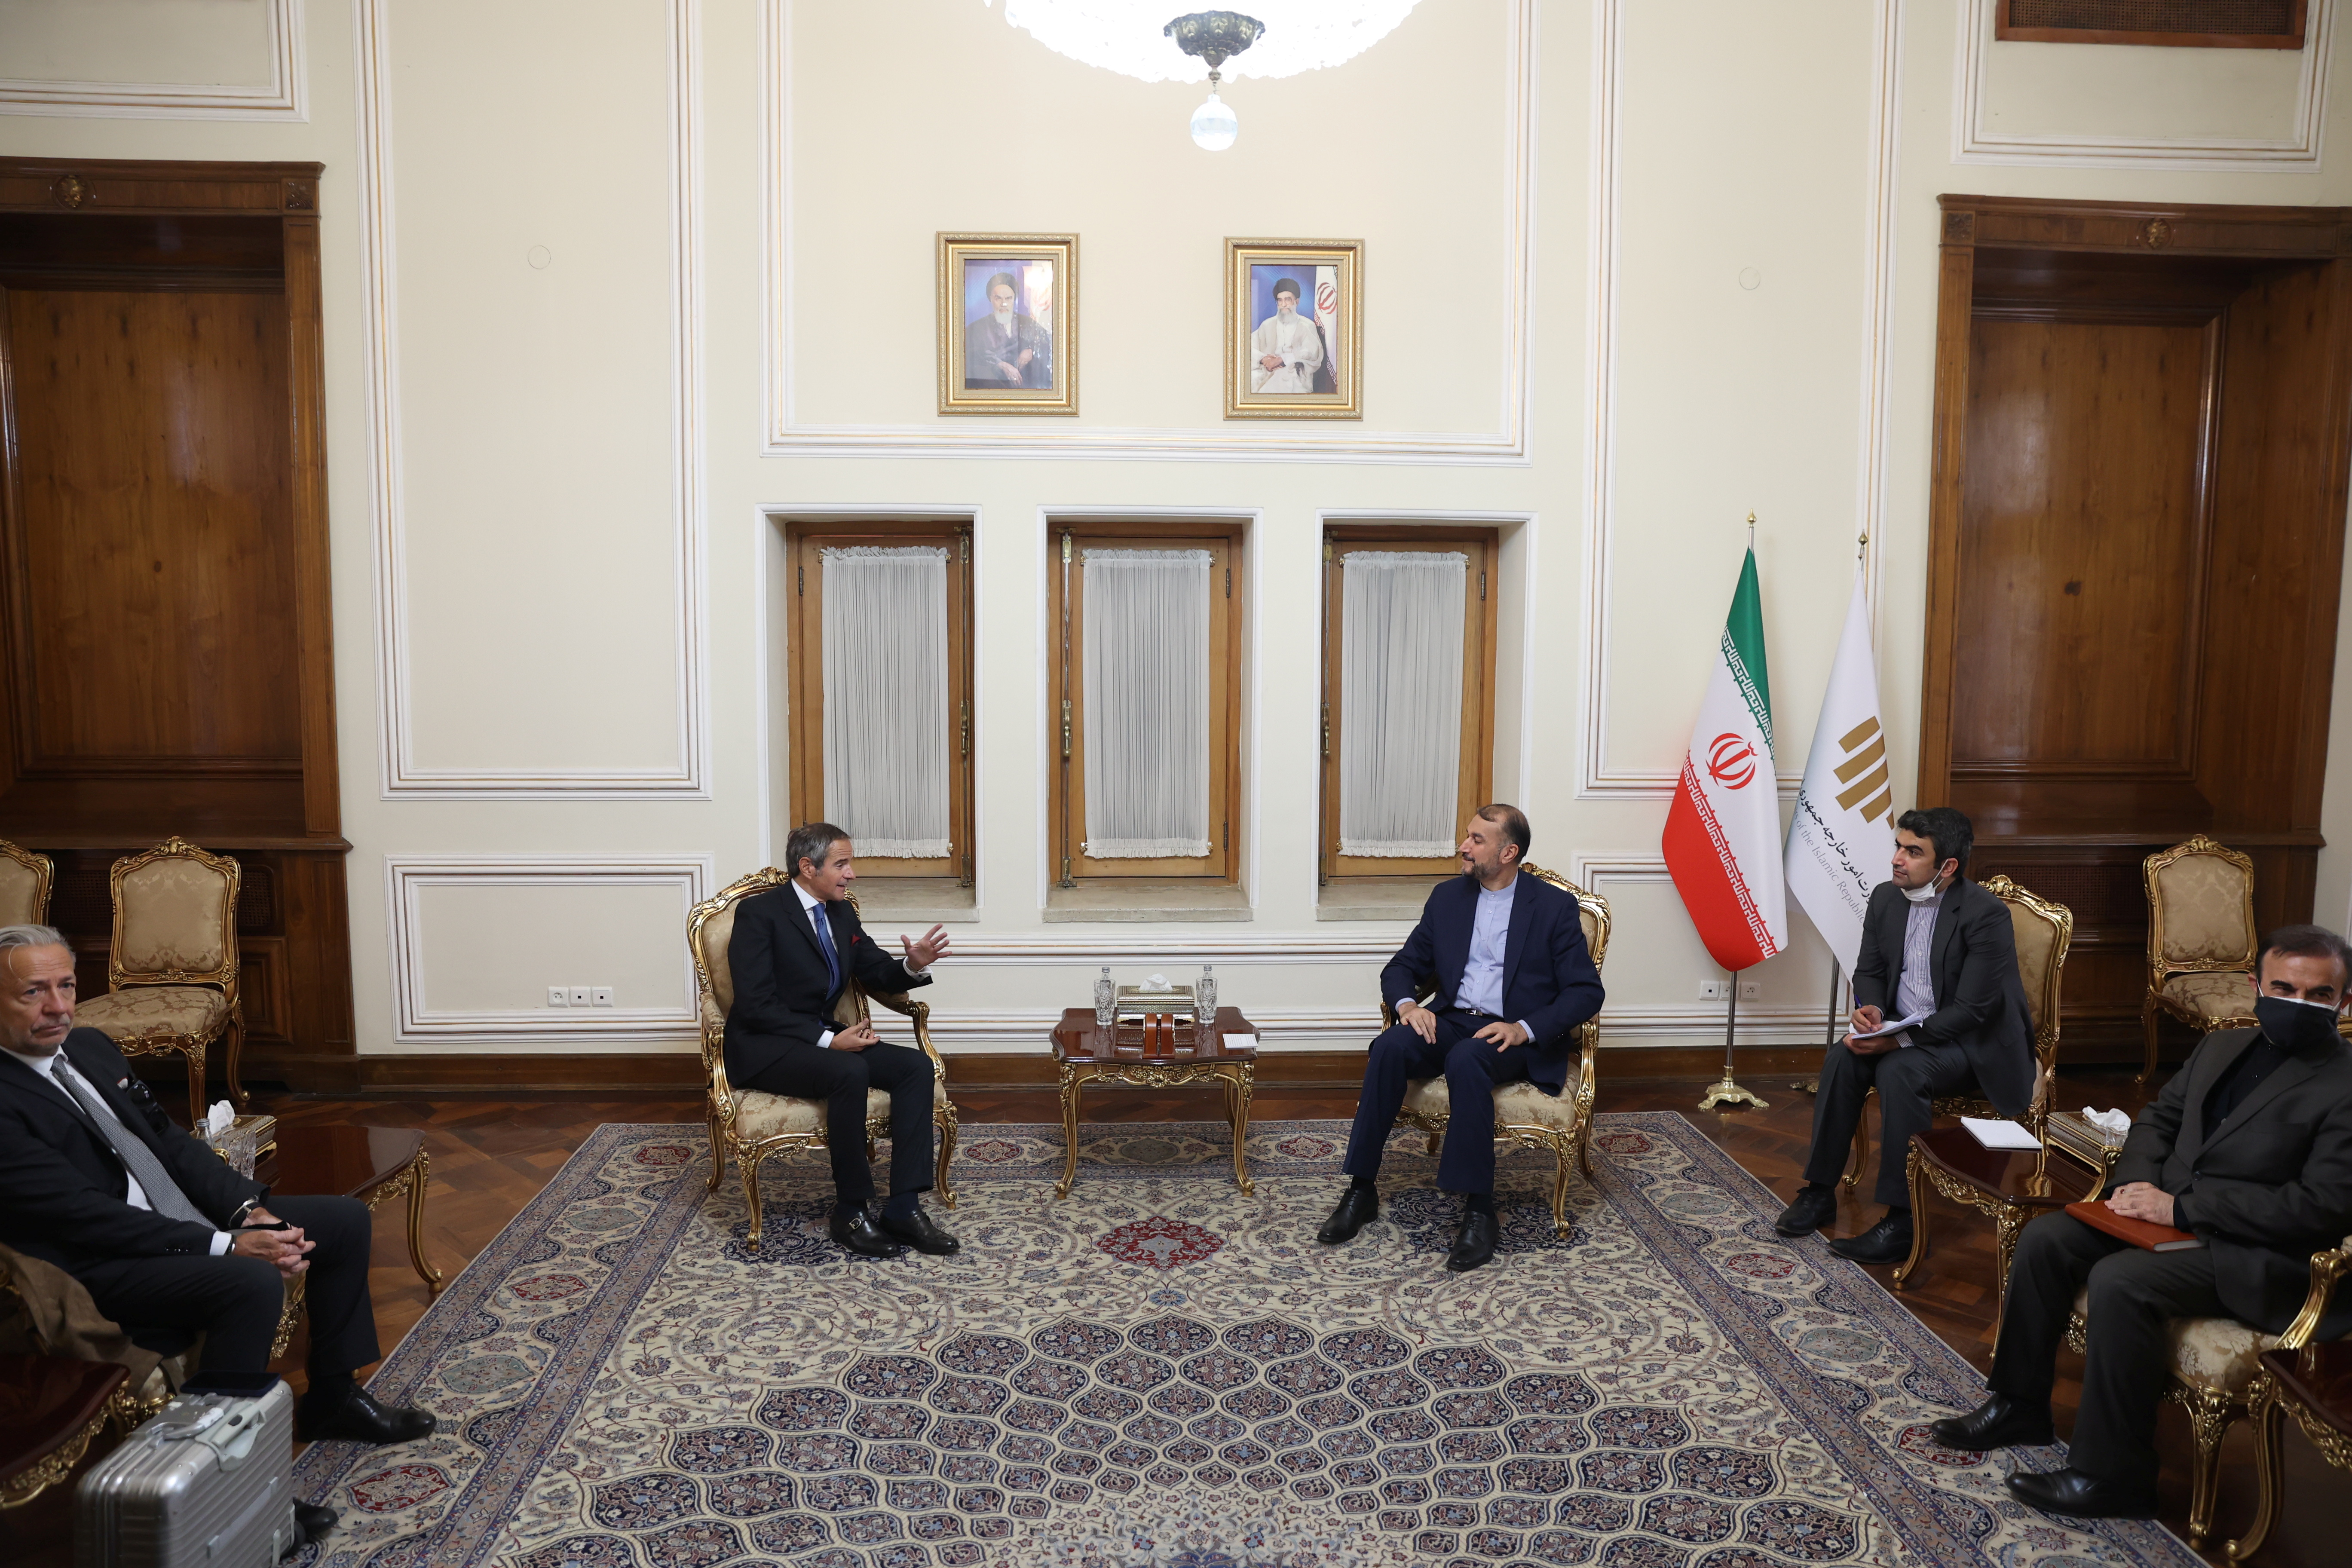 Iran's Foreign Minister Amir-Abdollahian meets with IAEA Director General Grossi in Tehran